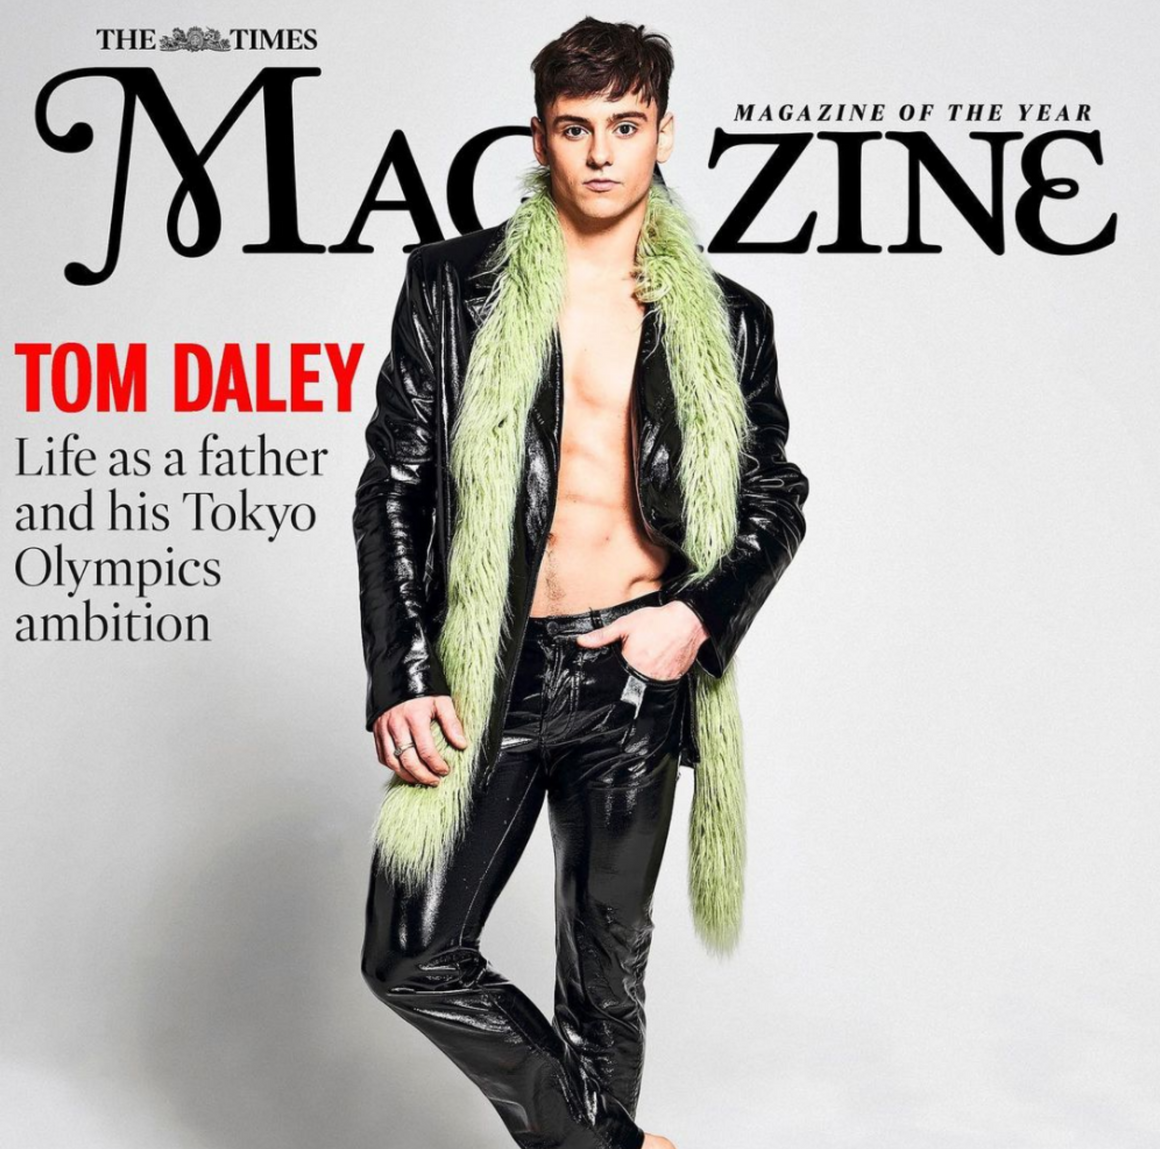 UK Times Magazine April 2021: TOM DALEY COVER FEATURE